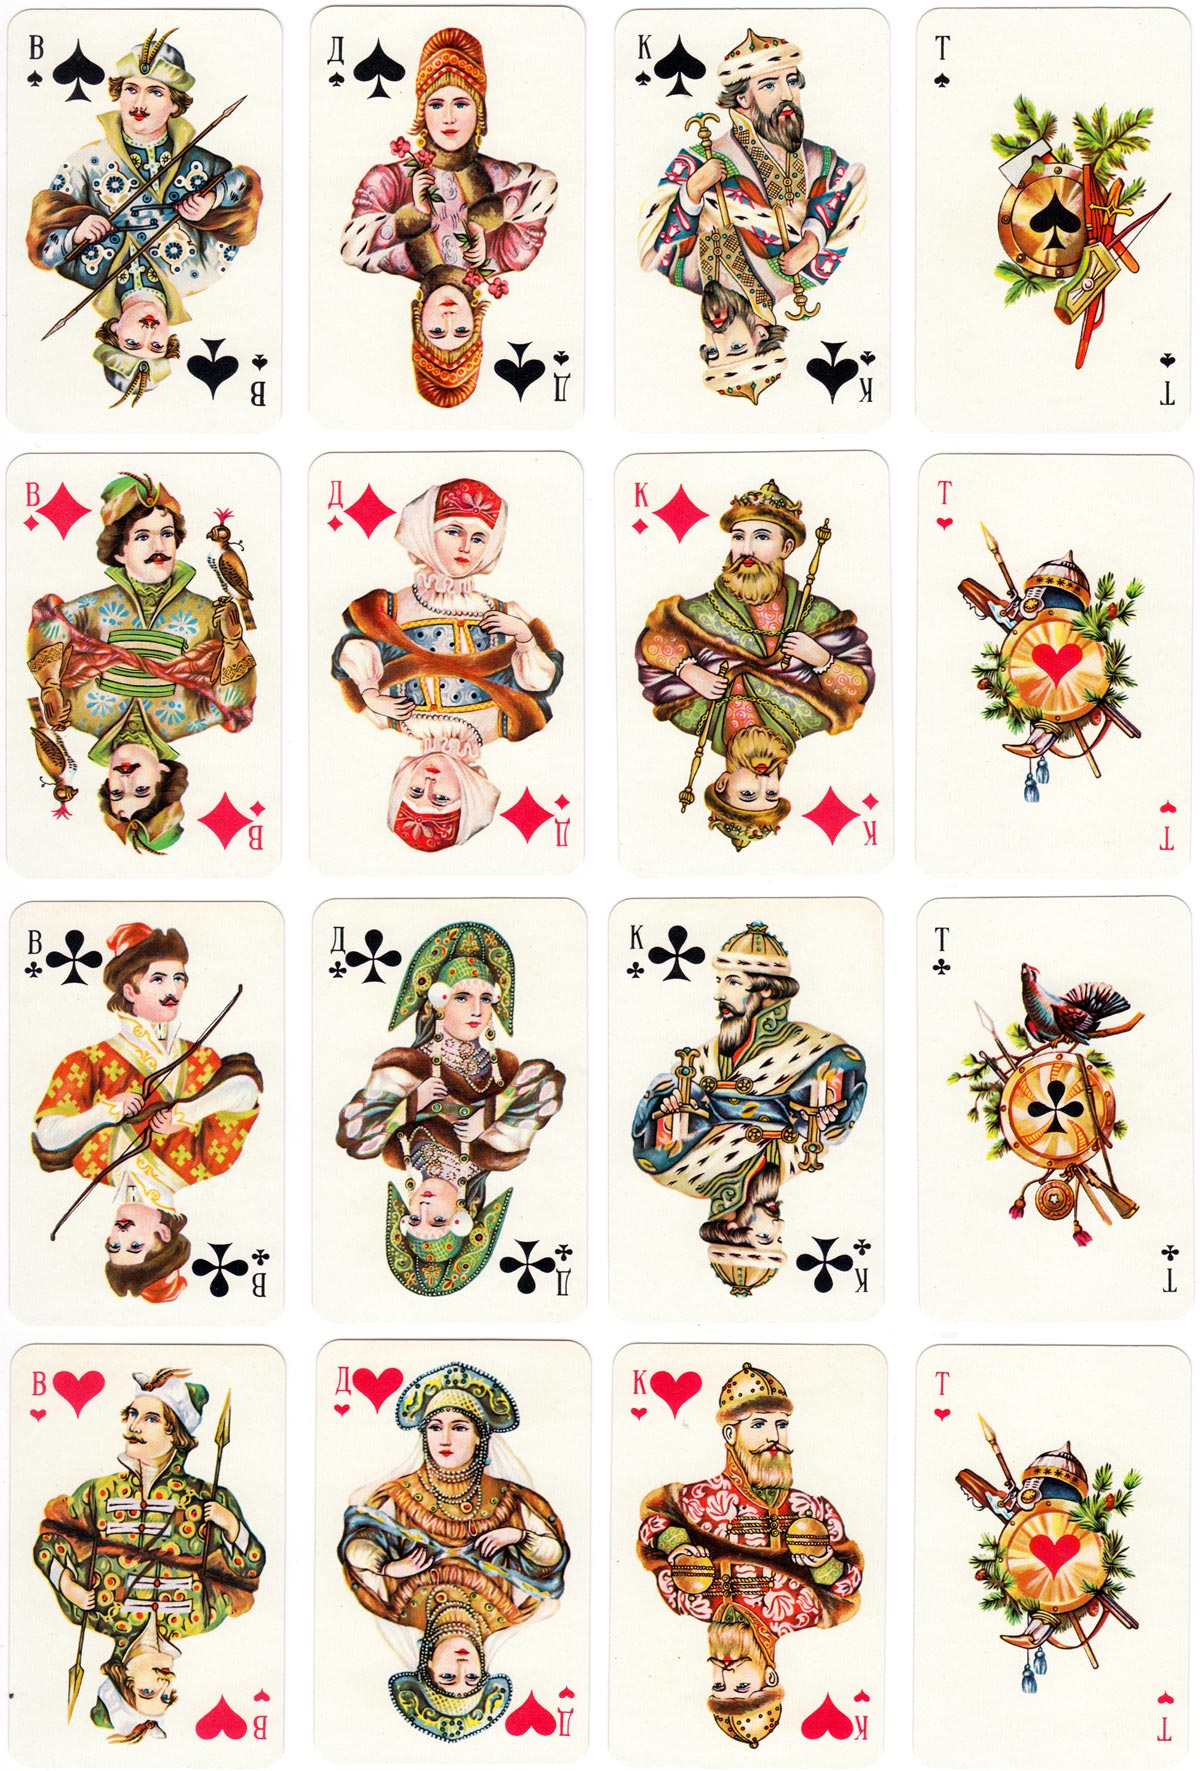 Traditional Russian style “Slavic Costumes” playing cards first published in 1911 by The Colour Printing Plant, St Petersburg